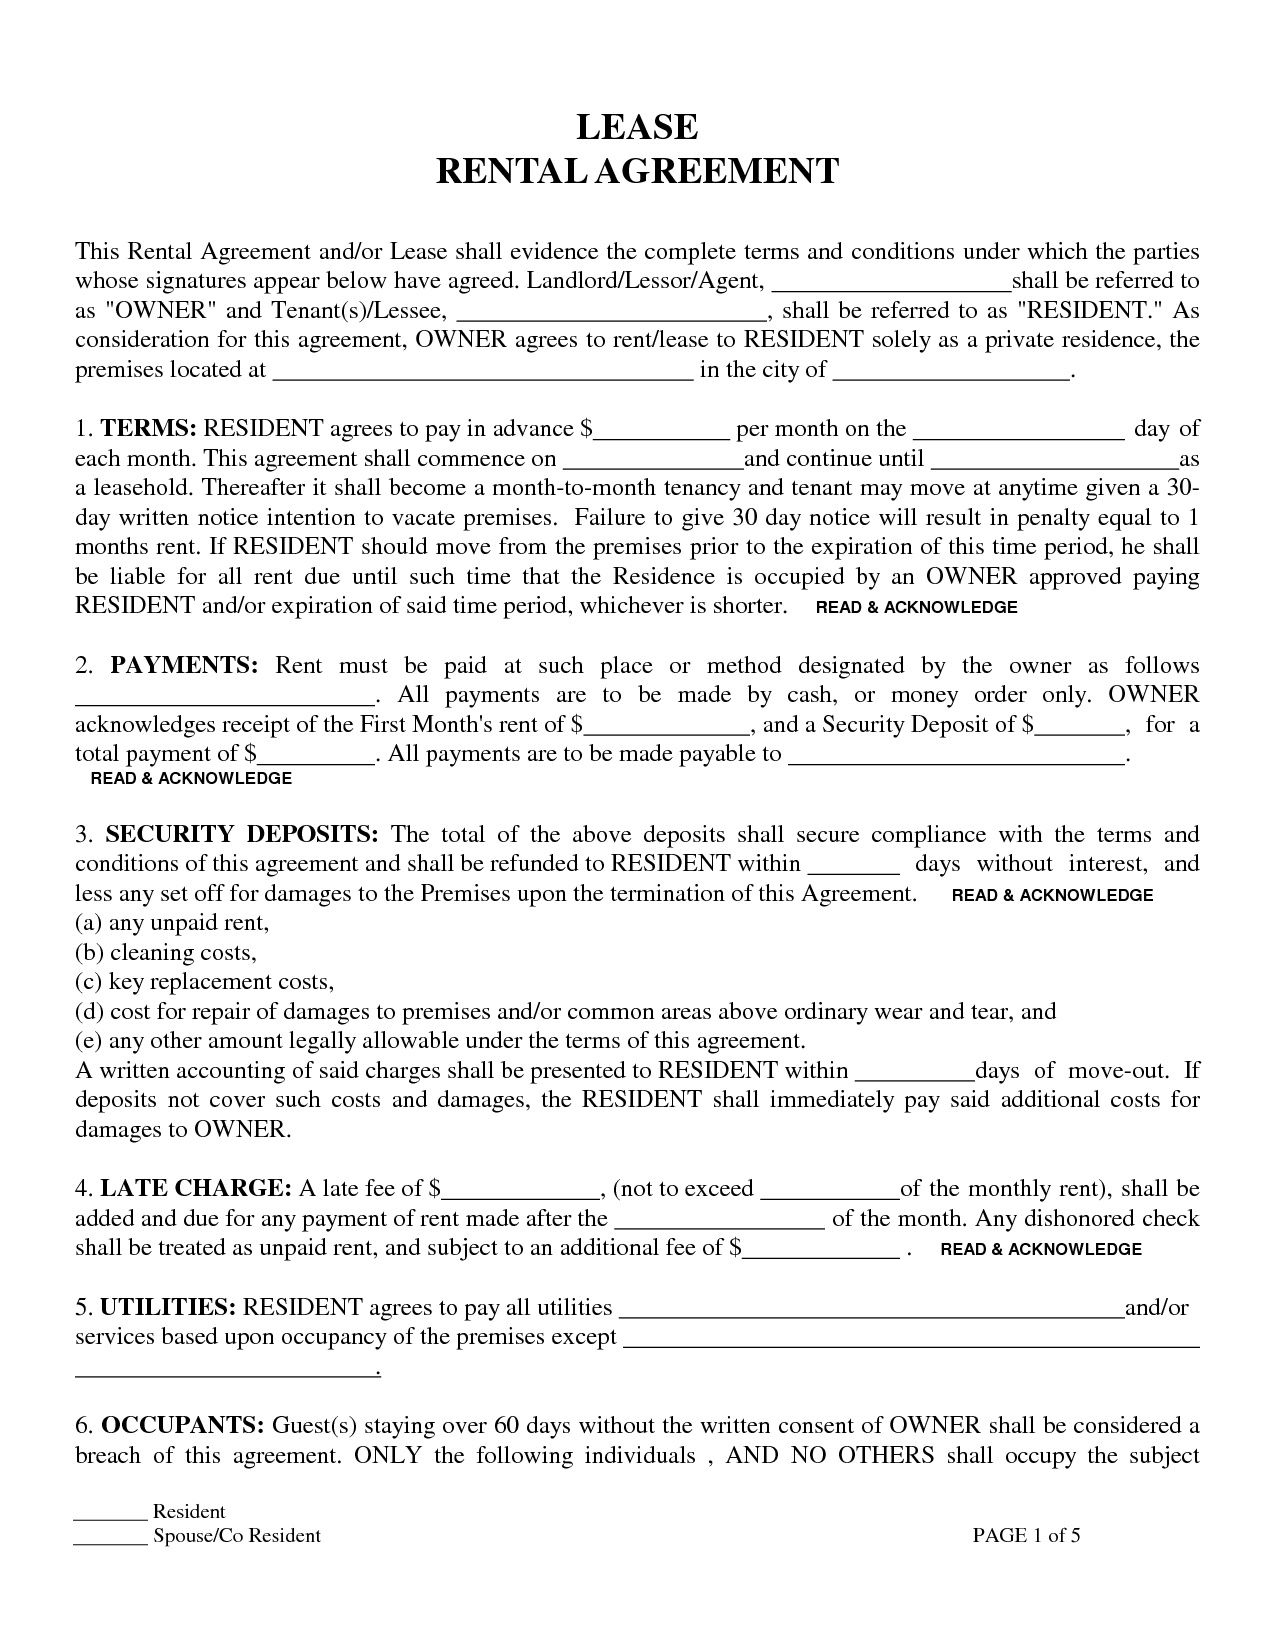 Apartment Lease Agreement Free Printable | Ellipsis - Free Printable Lease Agreement Ny